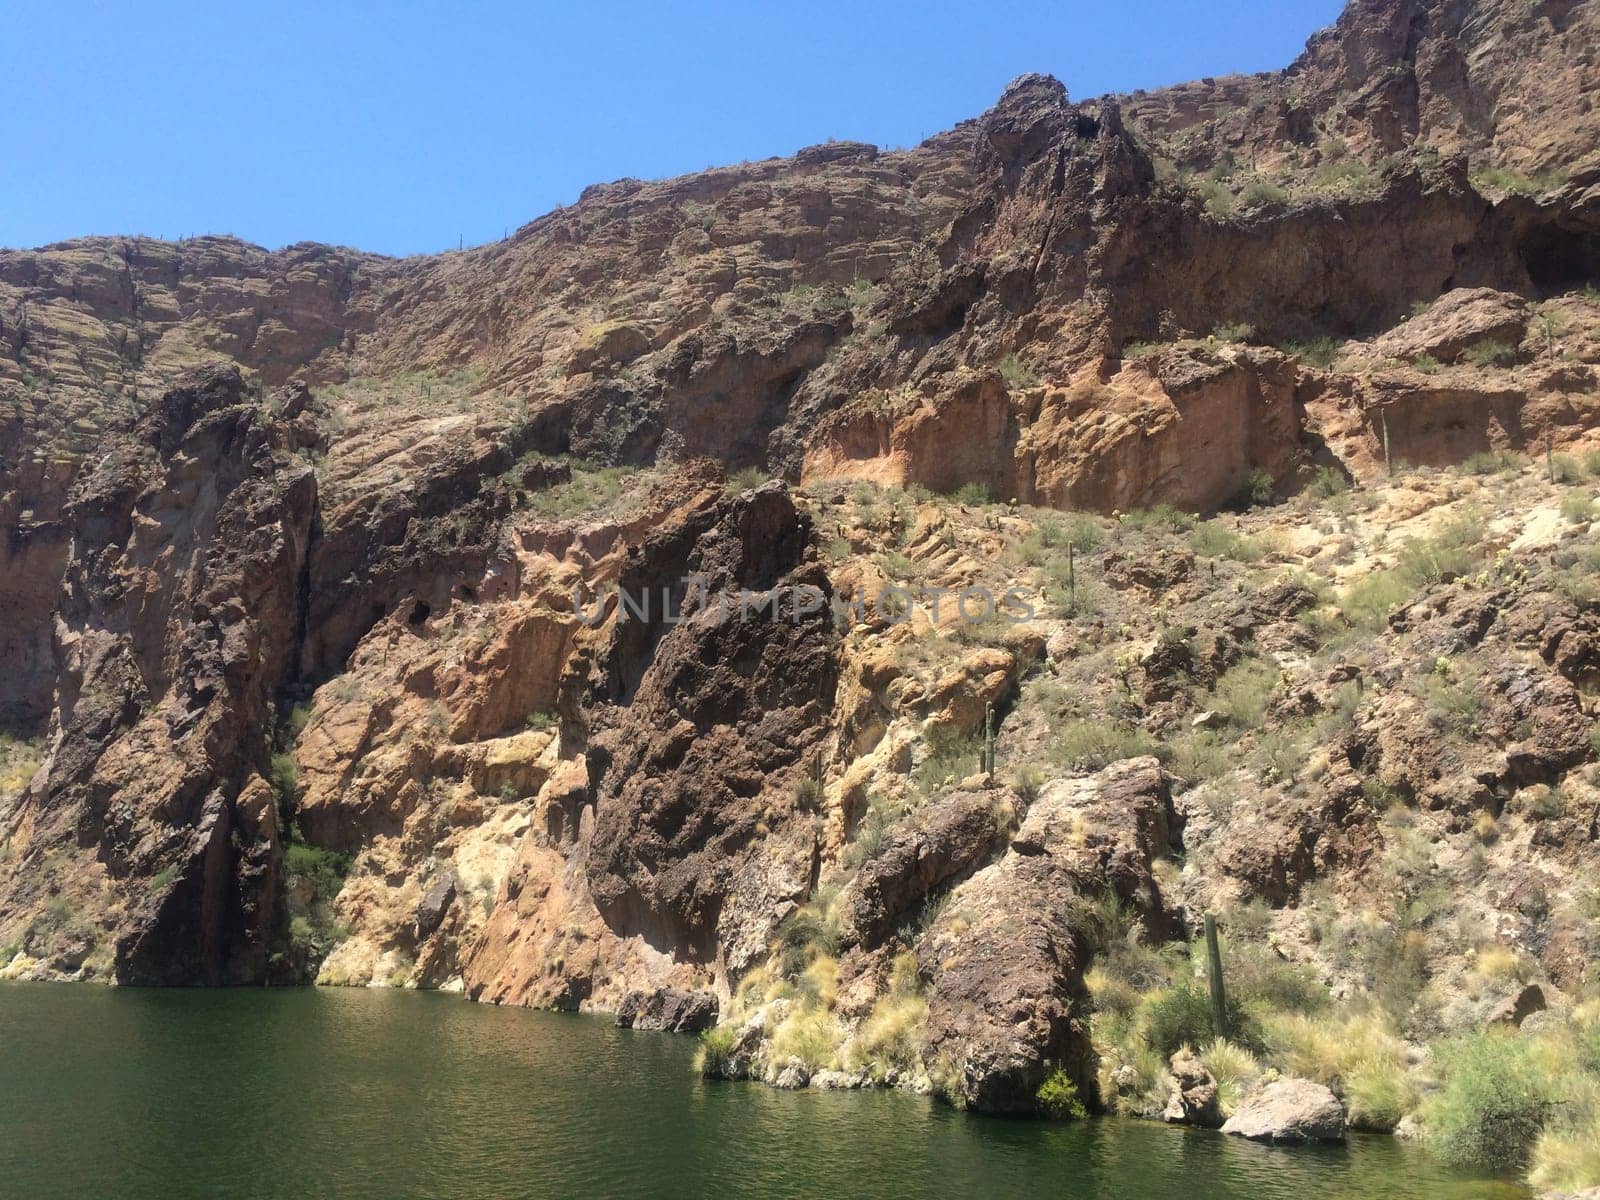 Tranquil Scene, Canyon Lake, Arizona. View from Boat. Water recreation in the Arizona desert. High quality photo